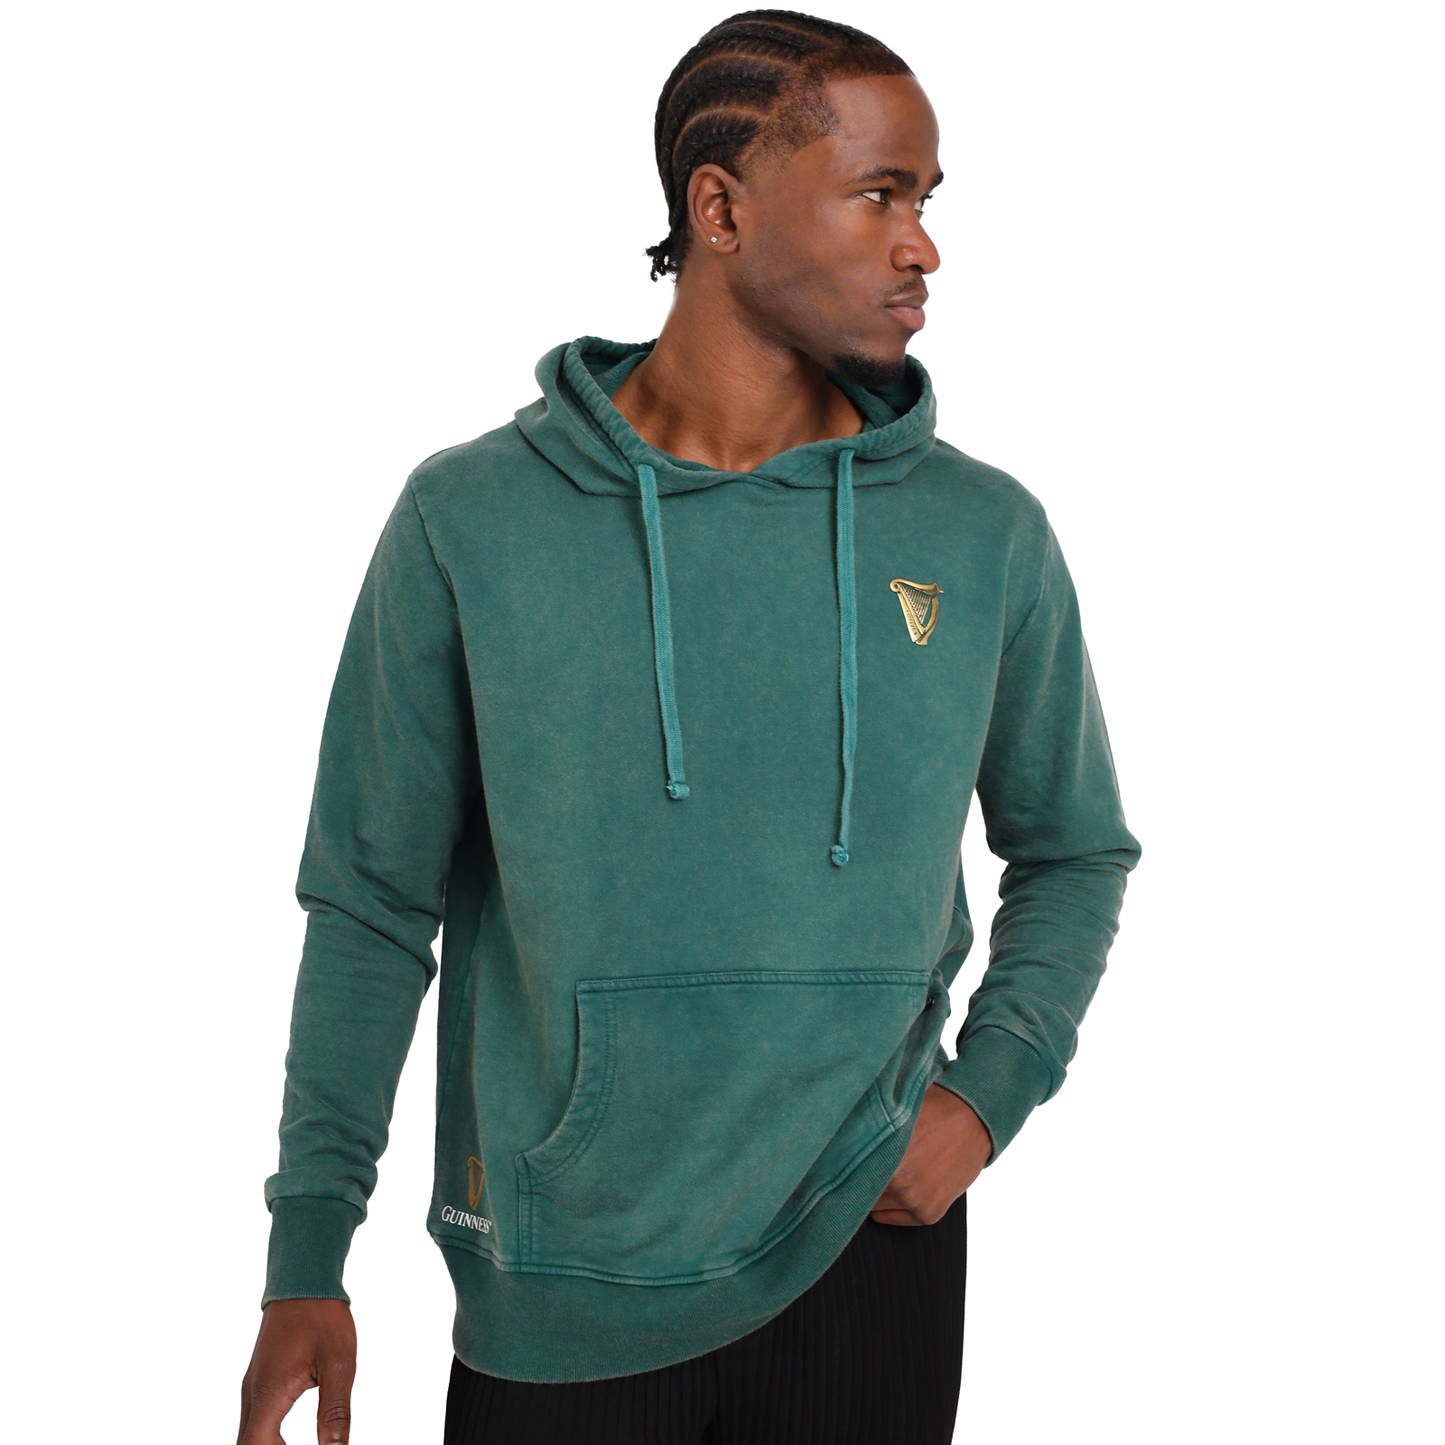 A man wearing a Guinness Forest Green & Gold Toucan Hoodie from the Guinness Webstore UK.